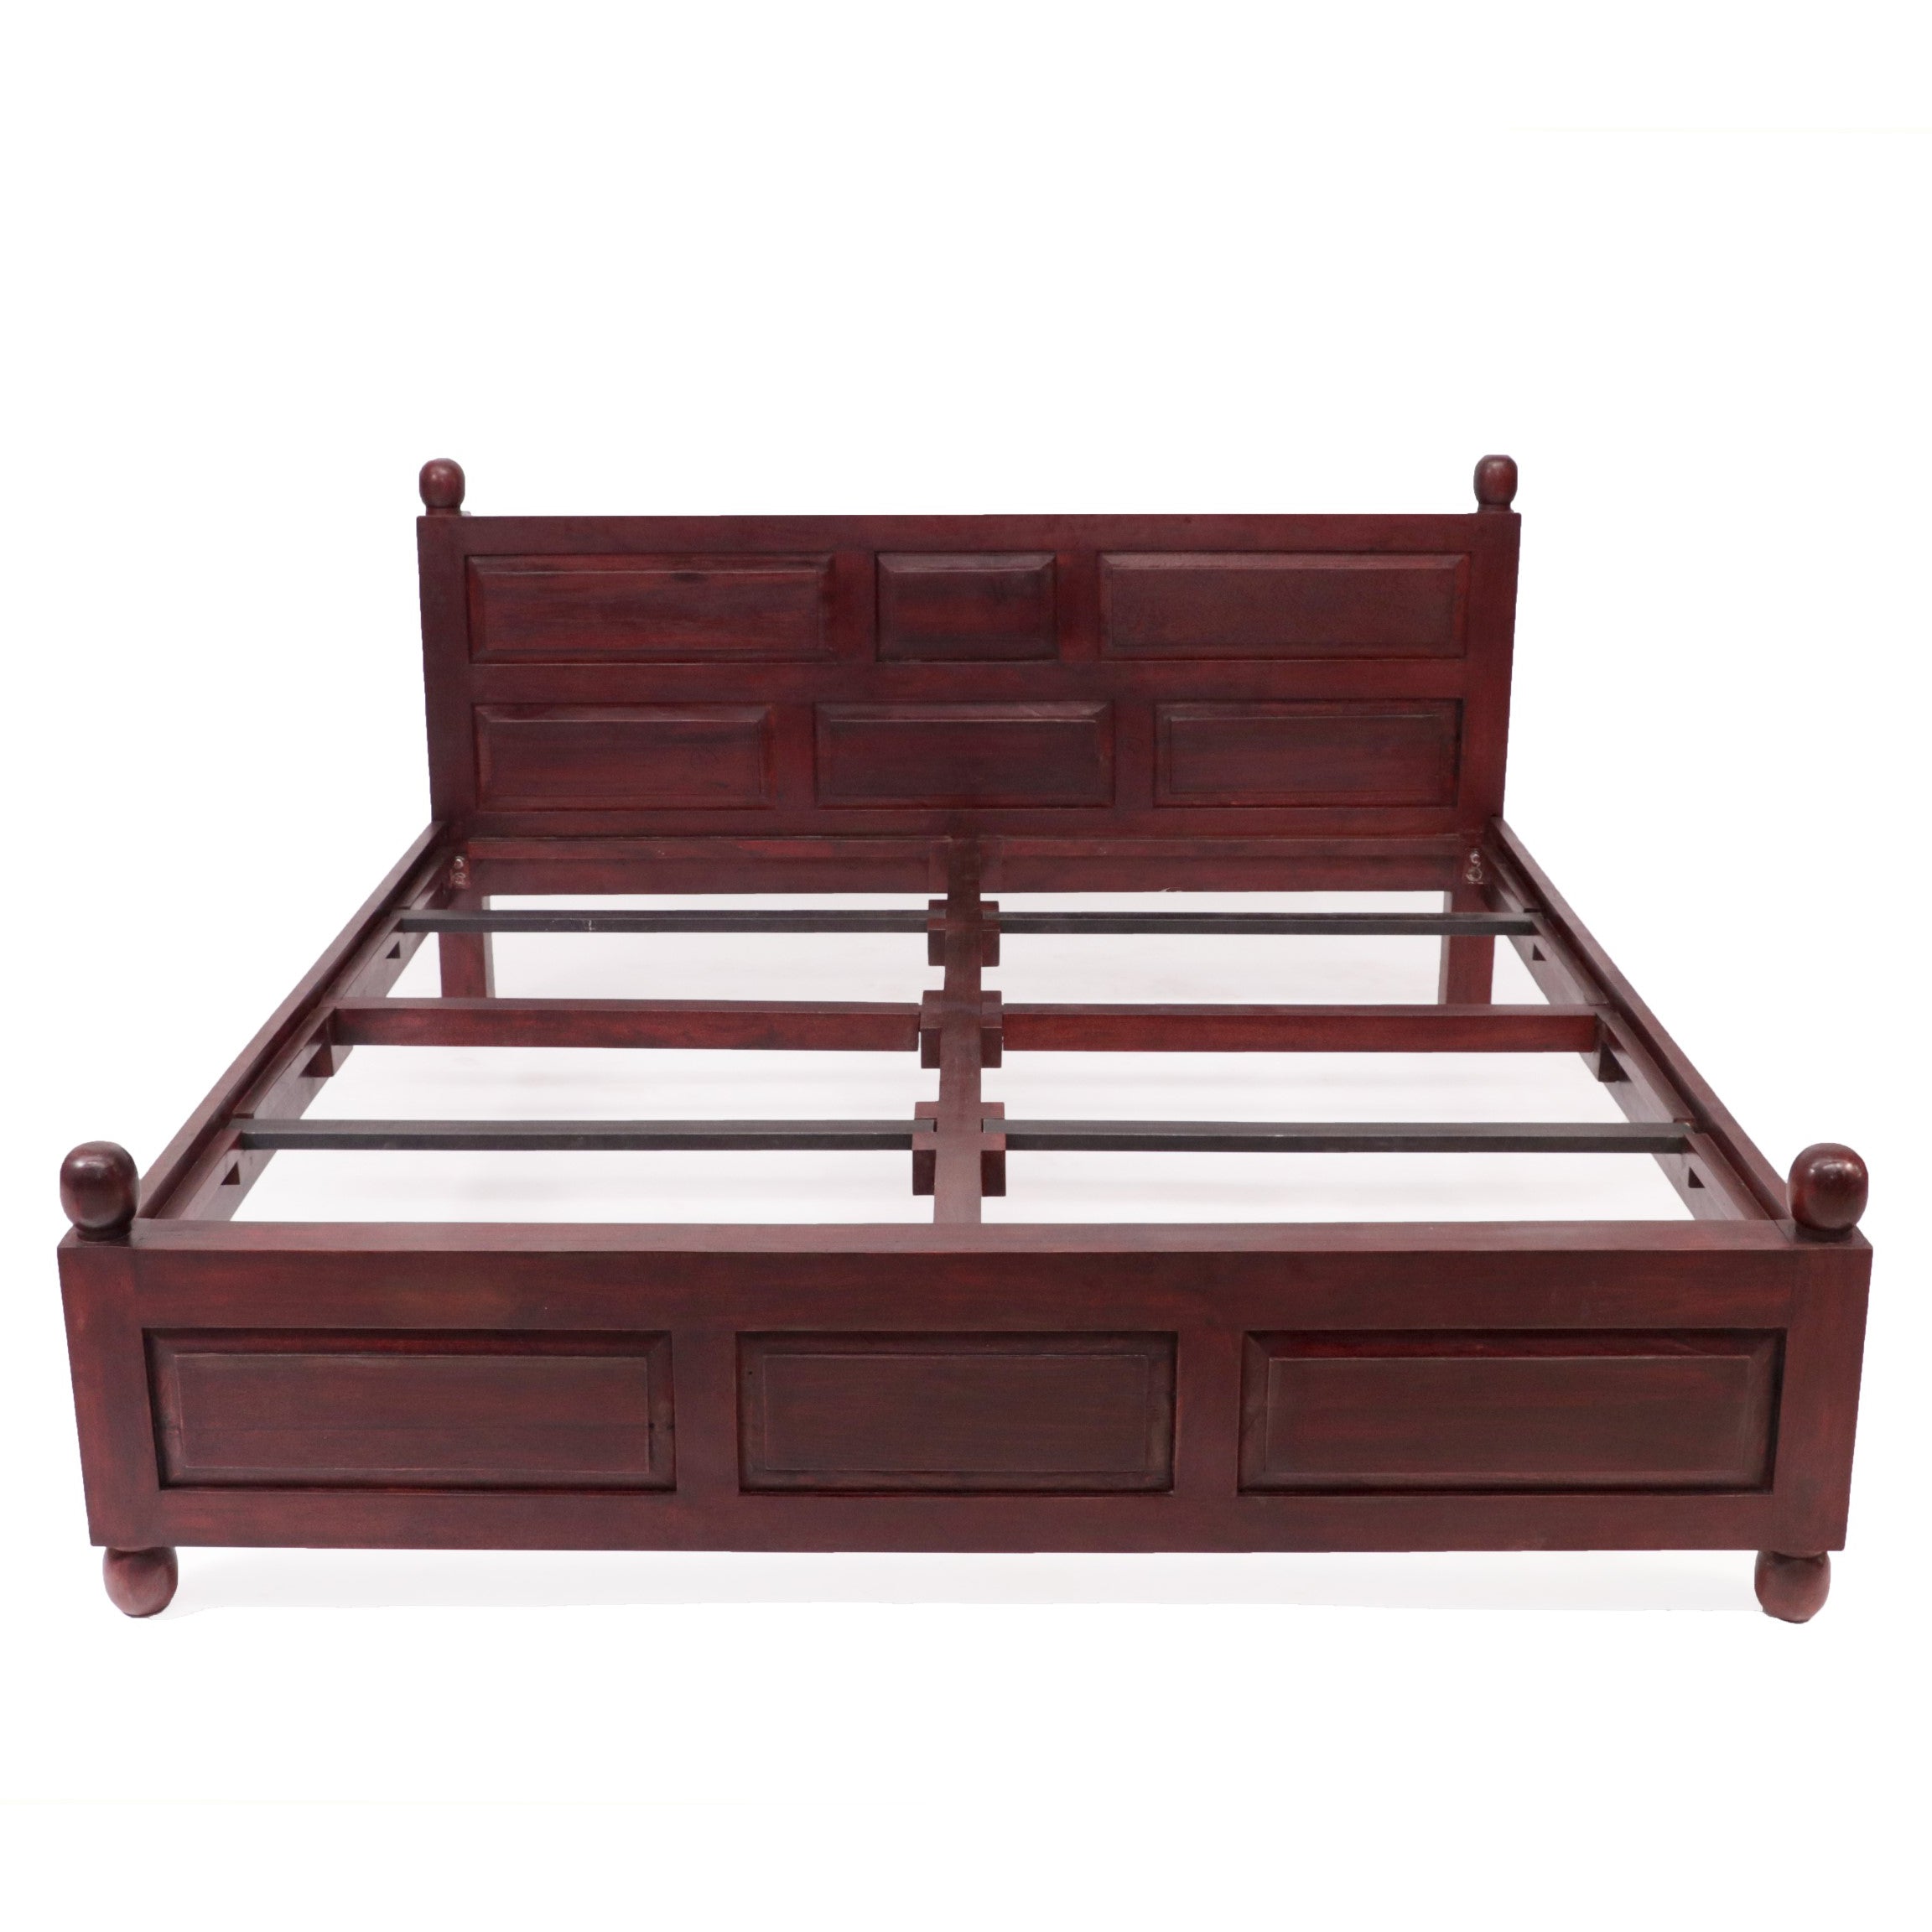 Wooden Plain Classical Bed Bed